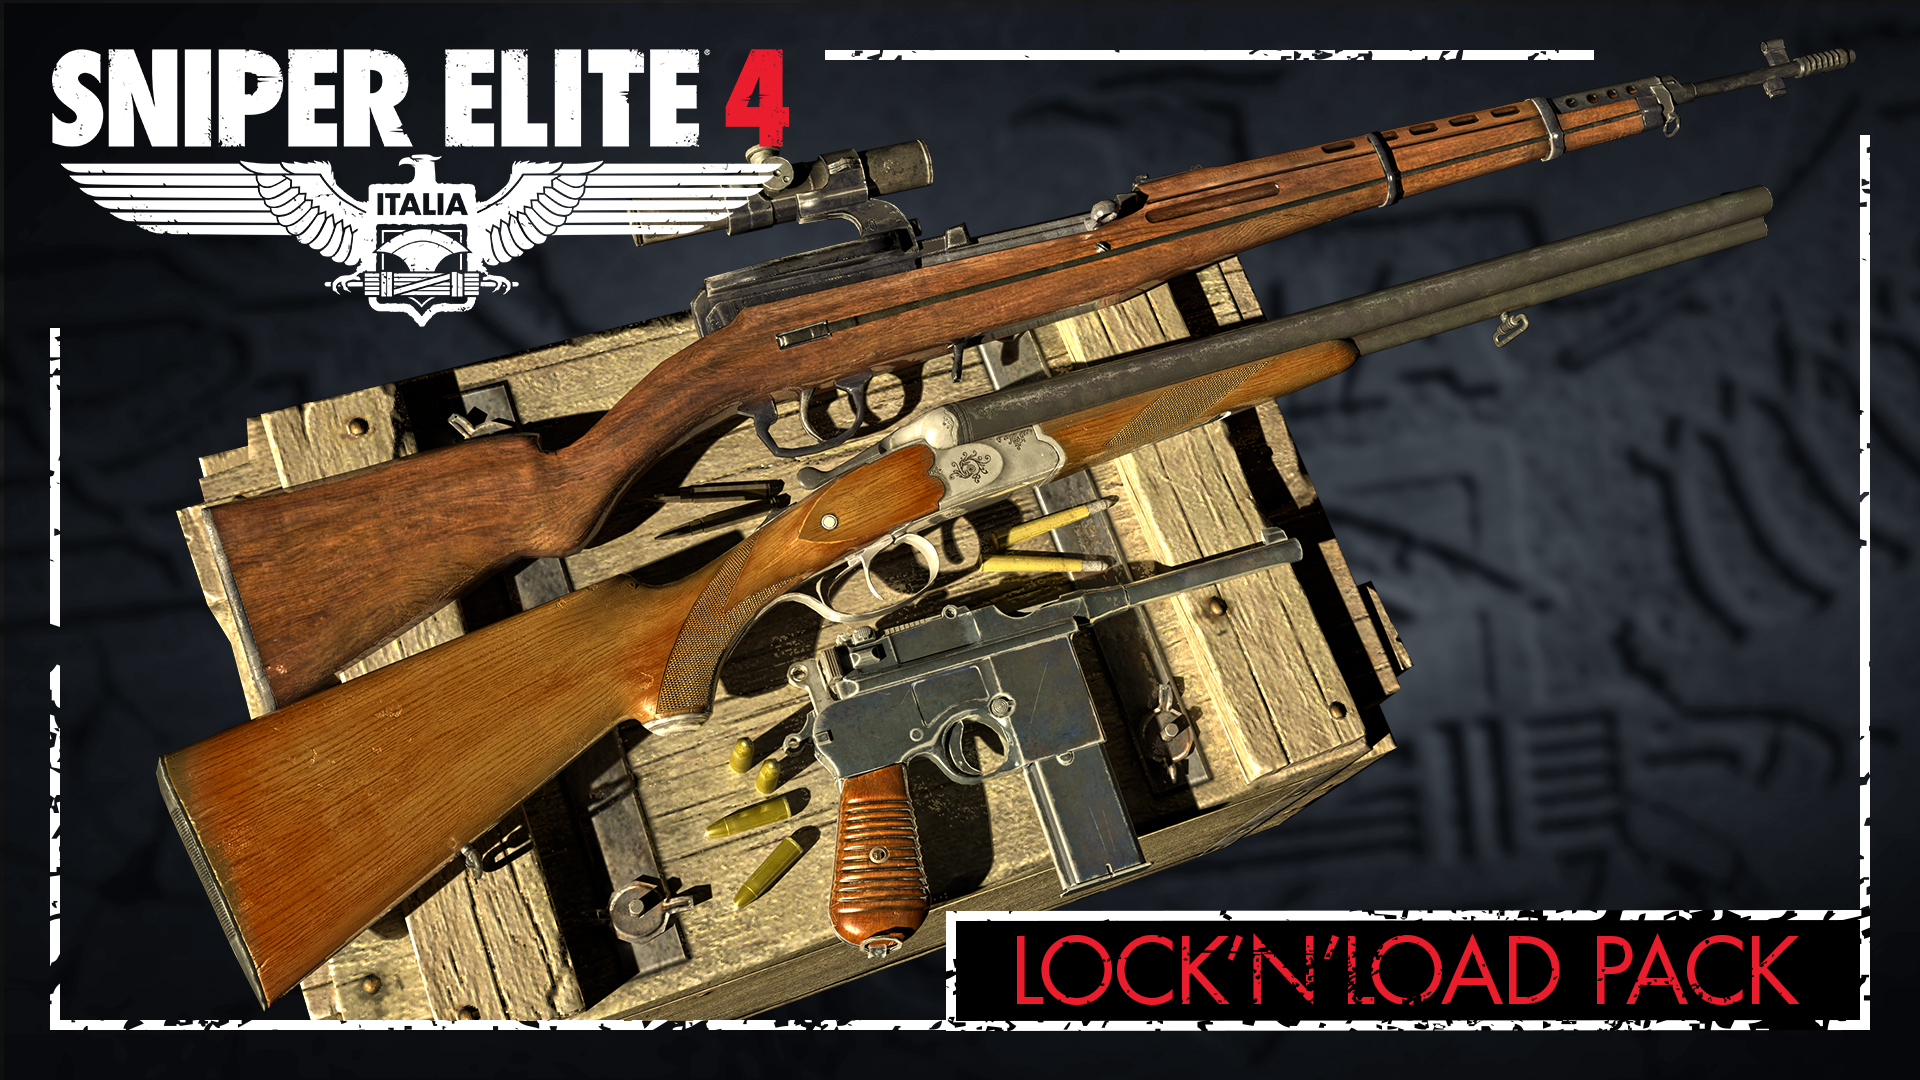 (4.51$) Sniper Elite 4 - Lock and Load Weapons Pack DLC Steam CD Key